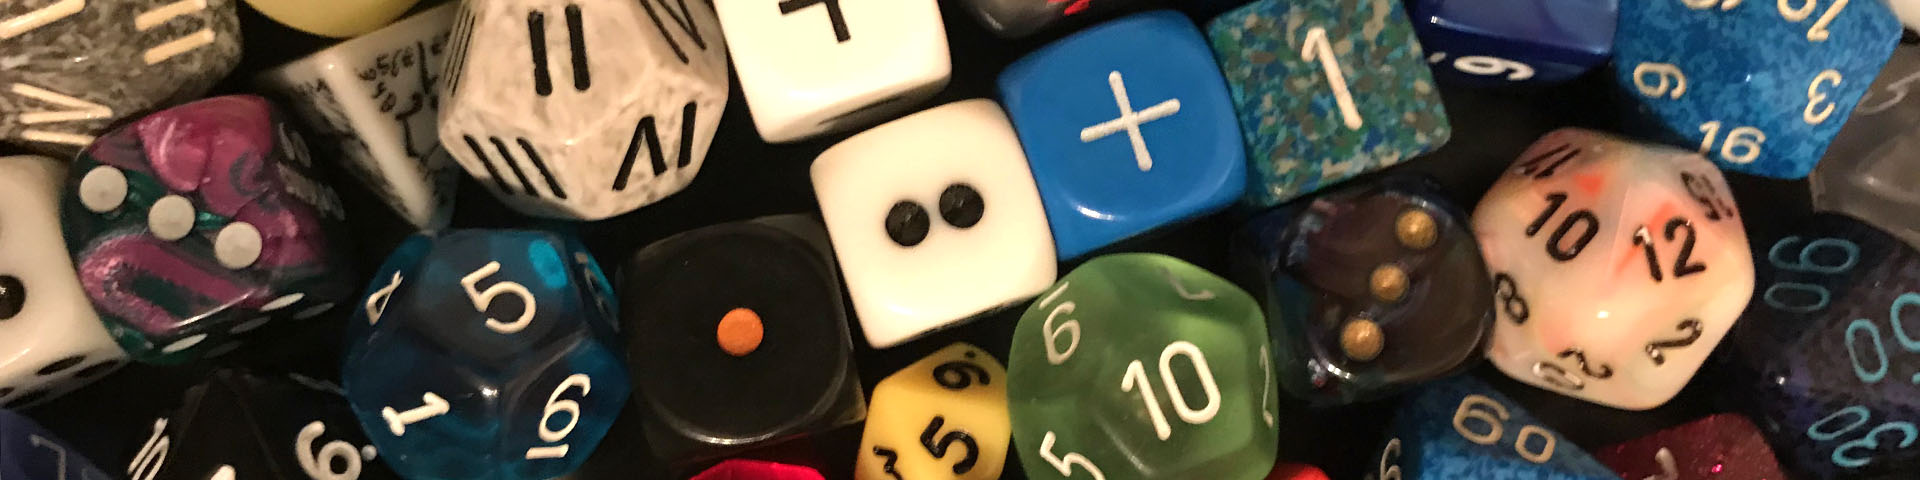 A collection of different sized and colored dice.